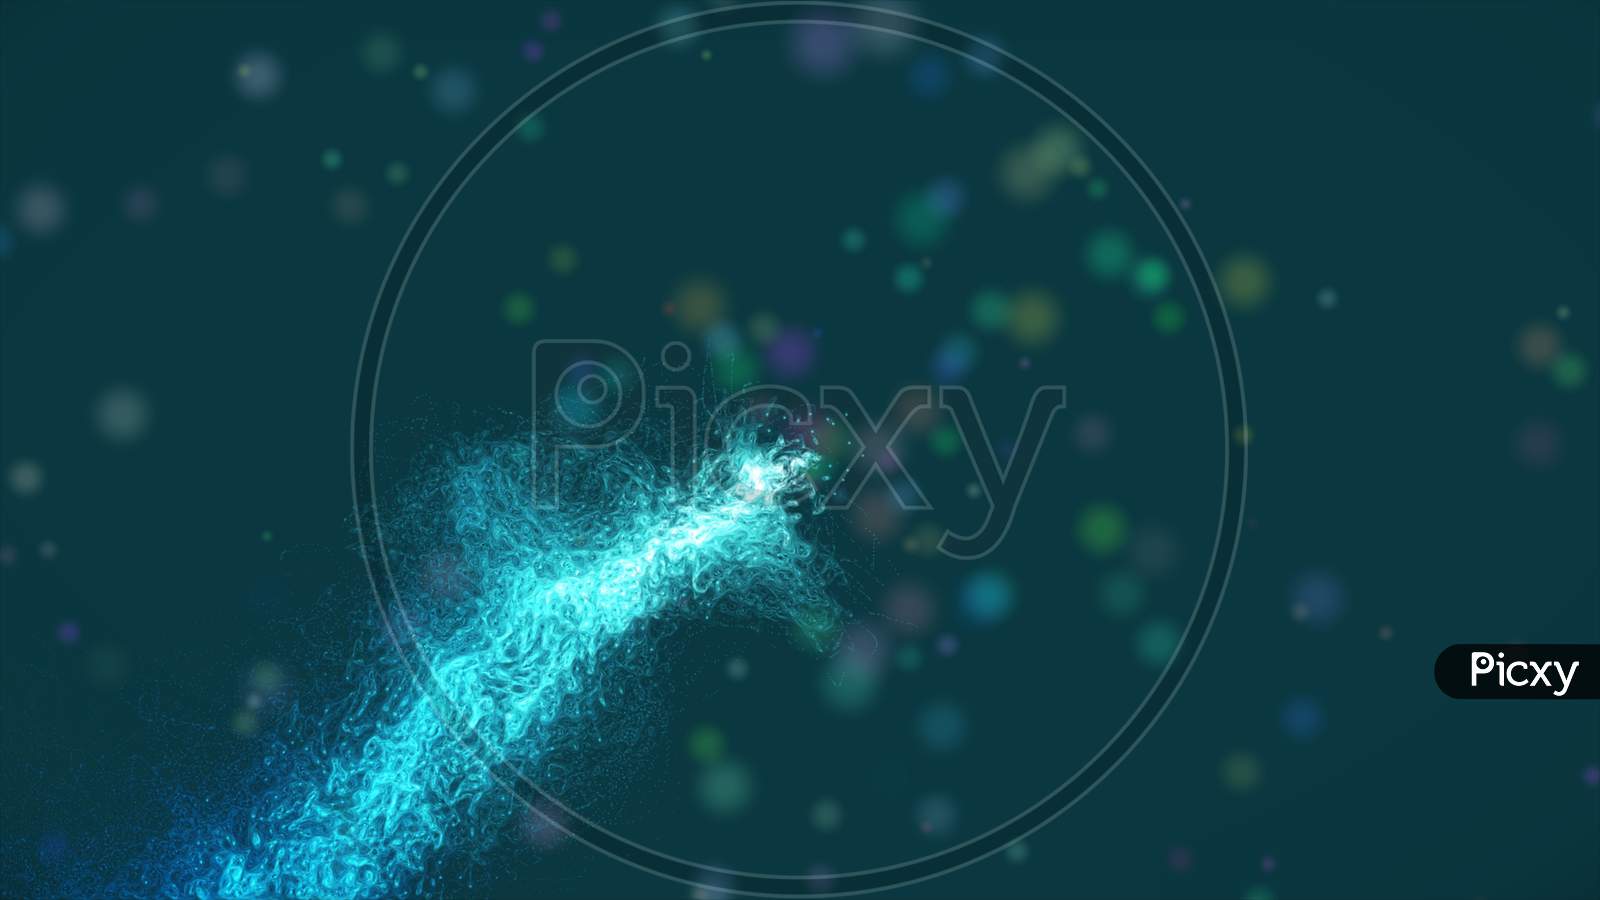 Abstract Texture Background With Glittery Colored Shiny Bokeh Spheres